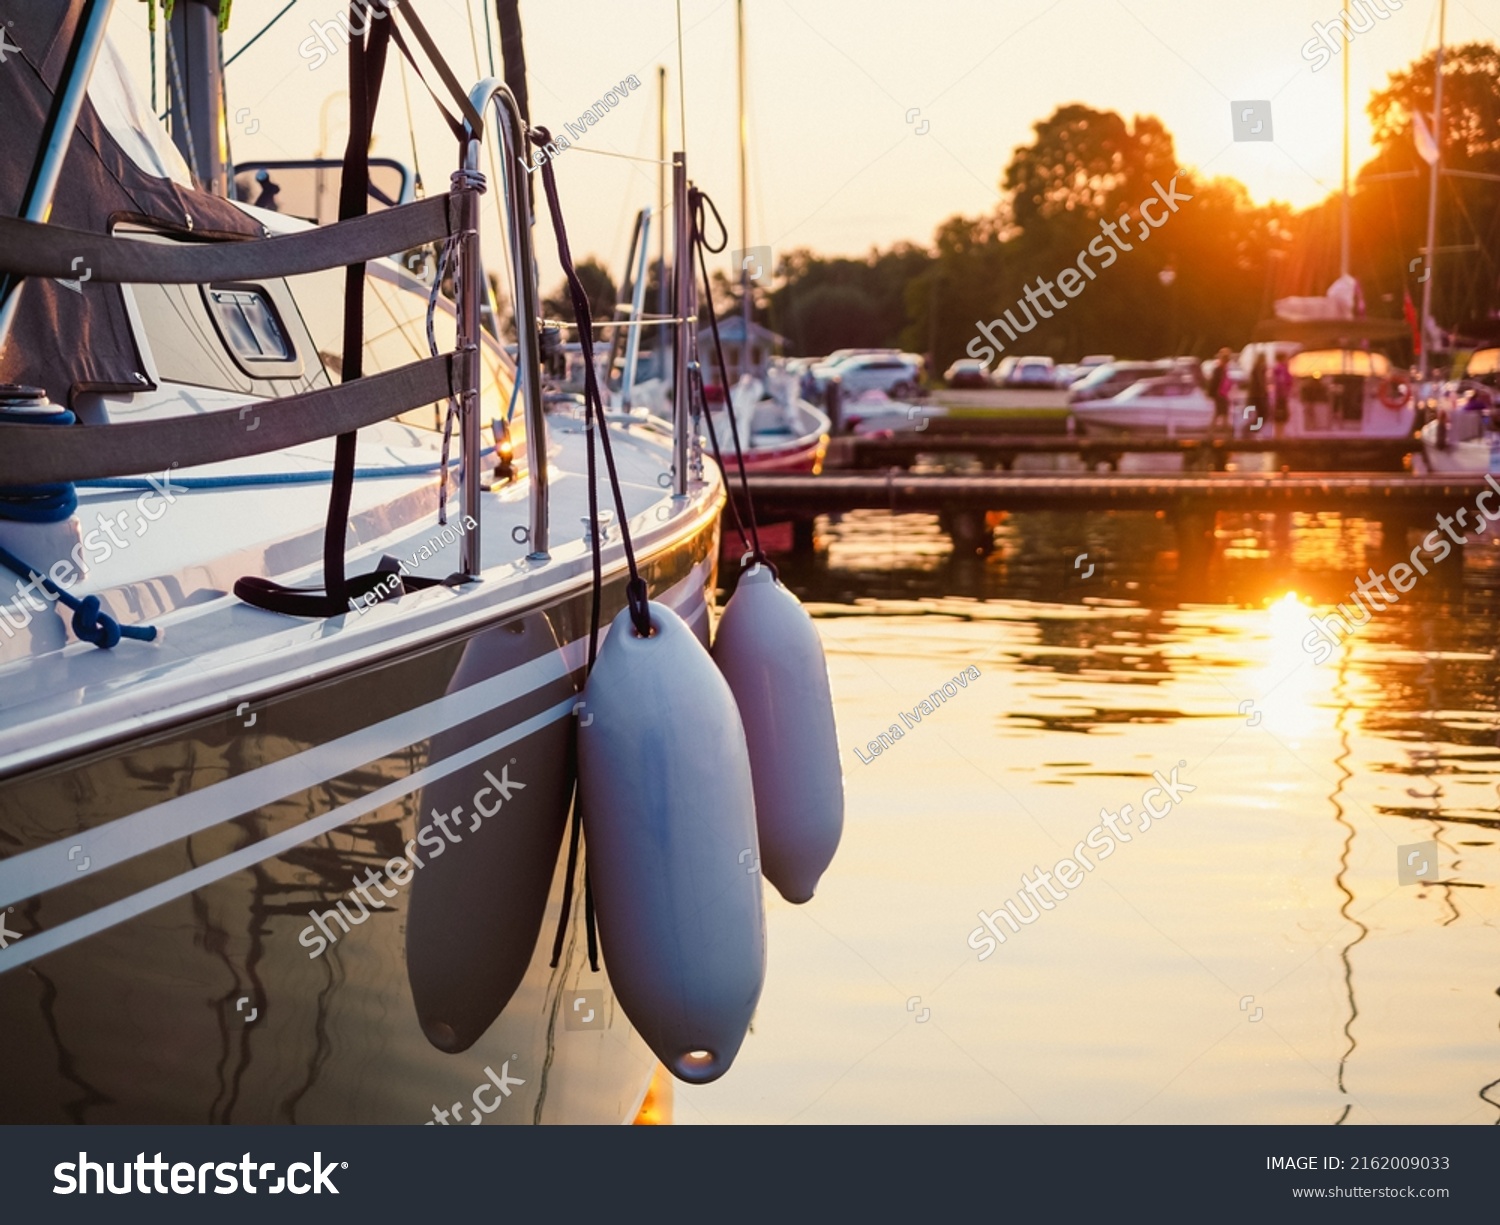 sunset view on sailing yacht moored on jetty in the port, close up view on sailboat hull, bow and fenders #2162009033